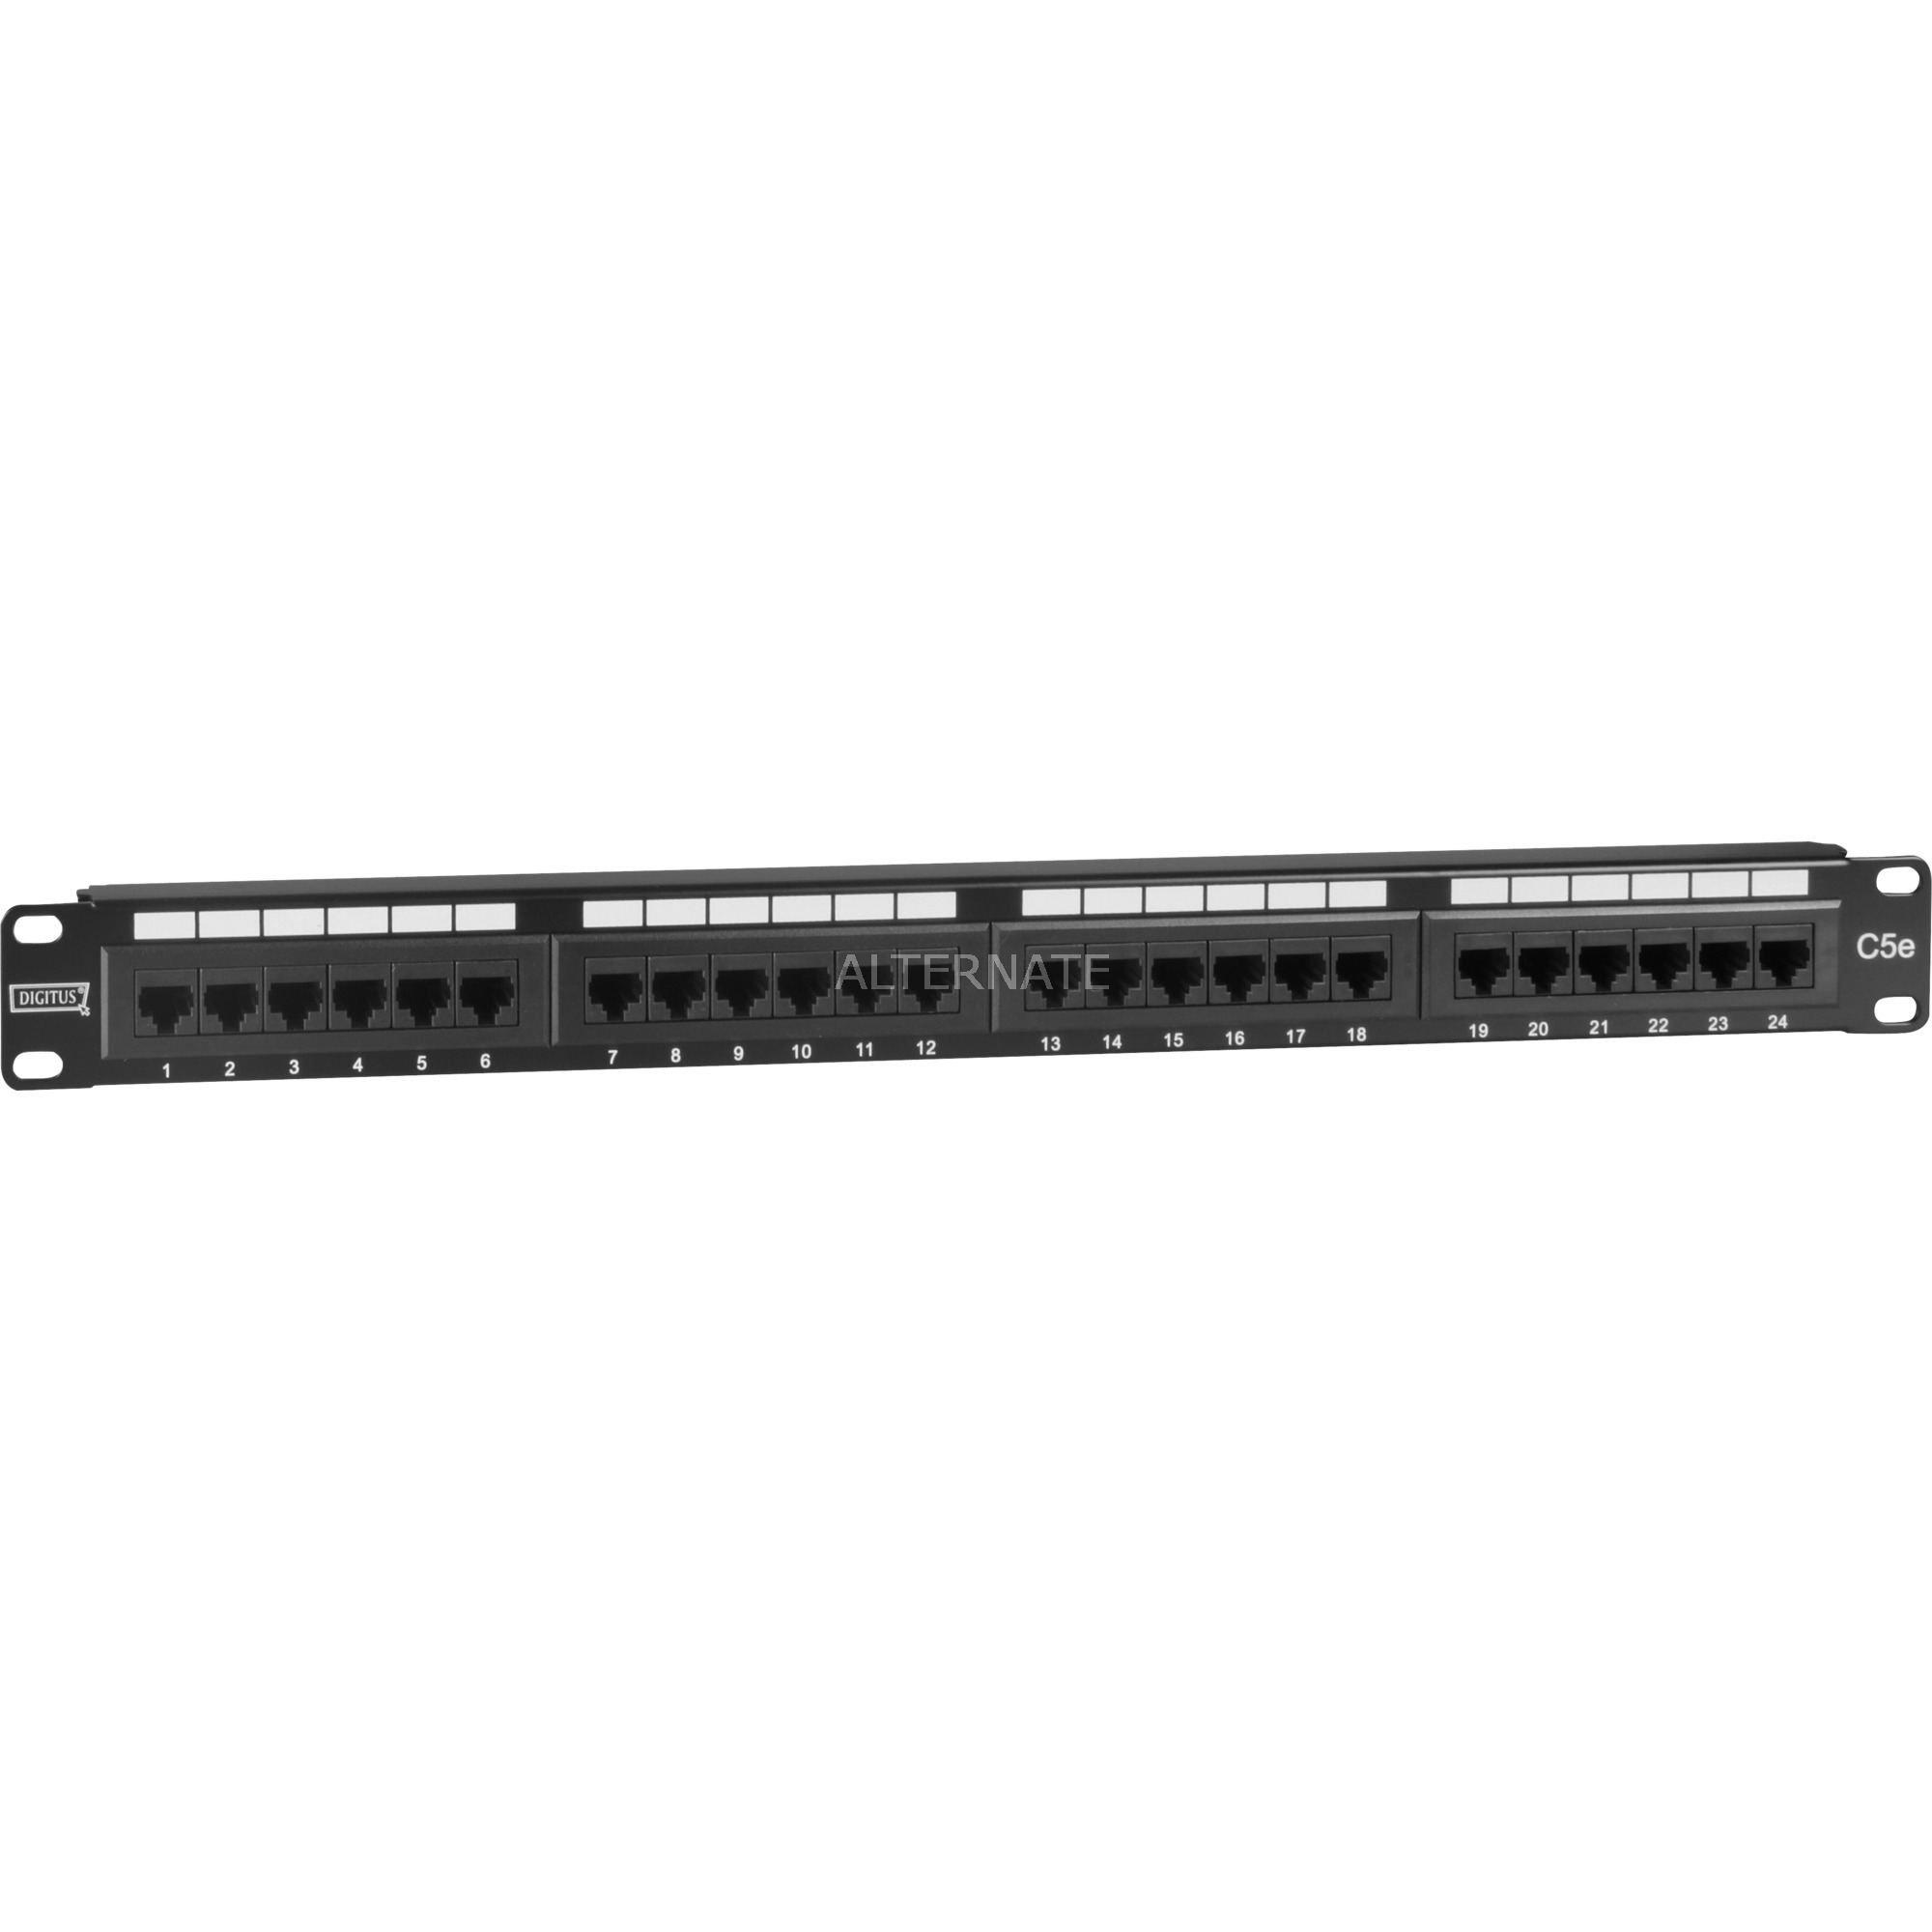 19" CAT 5e patch panel, Patchpanel